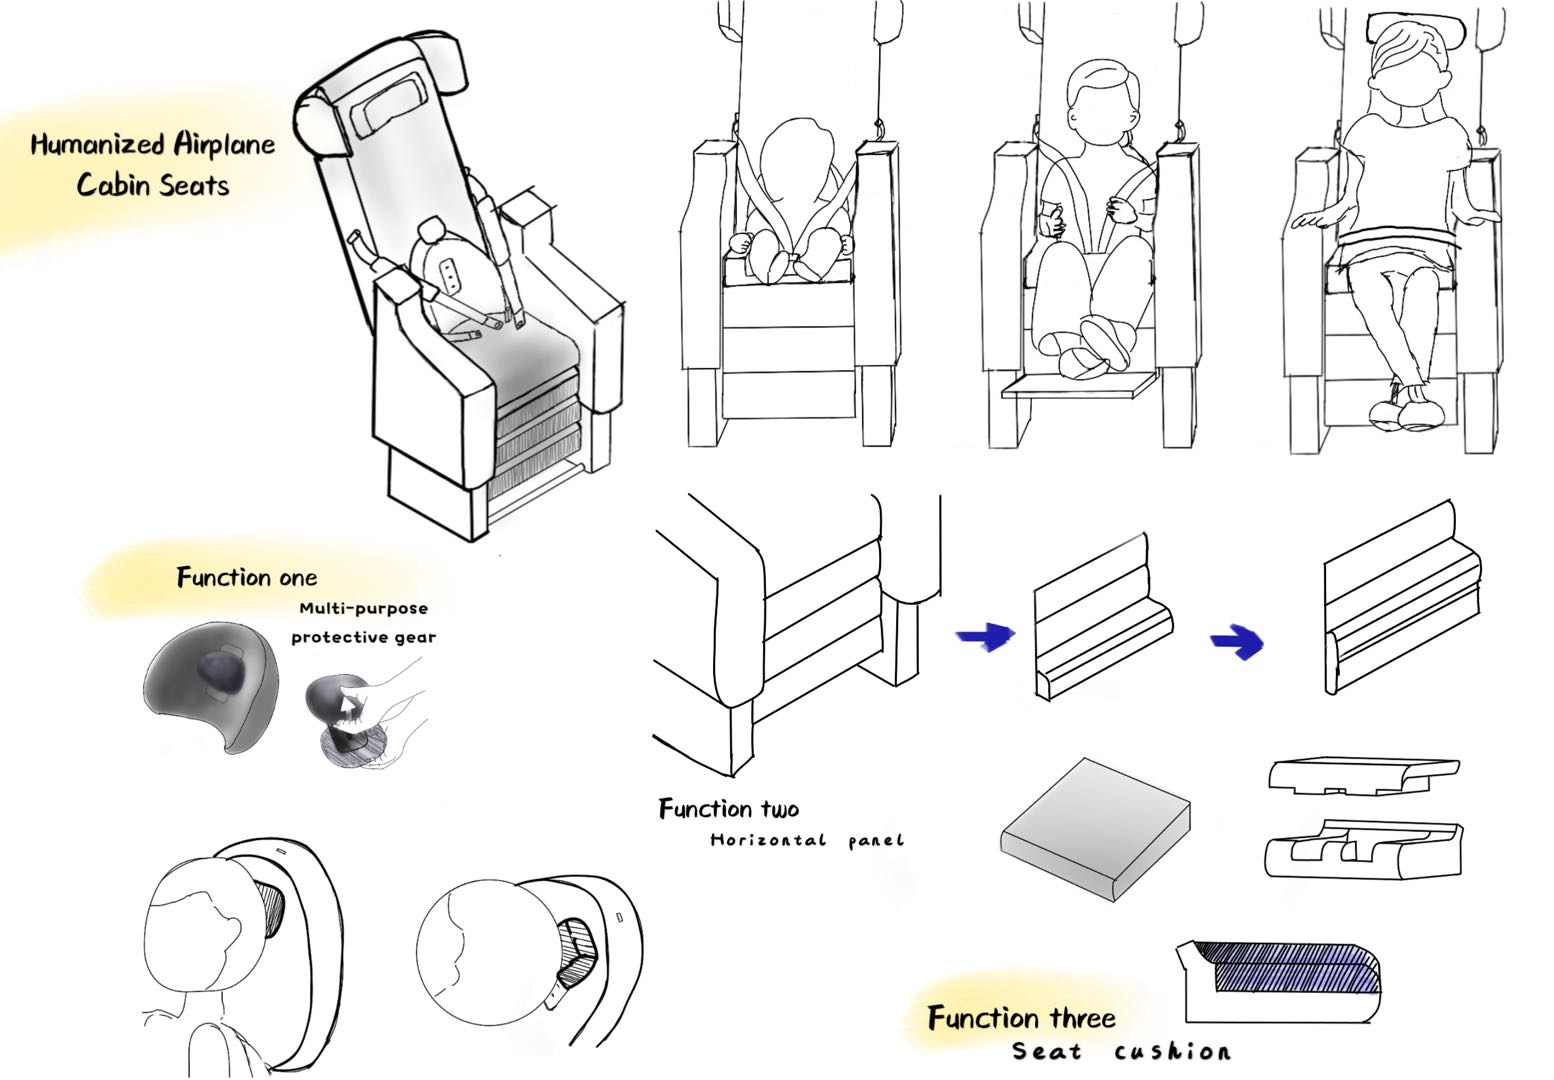 The horizontal panel on the bottom of the chair is designed can be bent to fit the child's leg length to allow the child to put their feet up.

Seat ergonomically sized for adults
Removing the seat cushion. The bottom cushion is more suitable for children up to the age of 8years and meets the comfort and ergonomics of children.

Multi-purpose protective gear can be used as an adult waist guard and a child's head guard. This is adjustable and has 4 adjustment positions. Children and adults can adjust according to their height and comfort level.